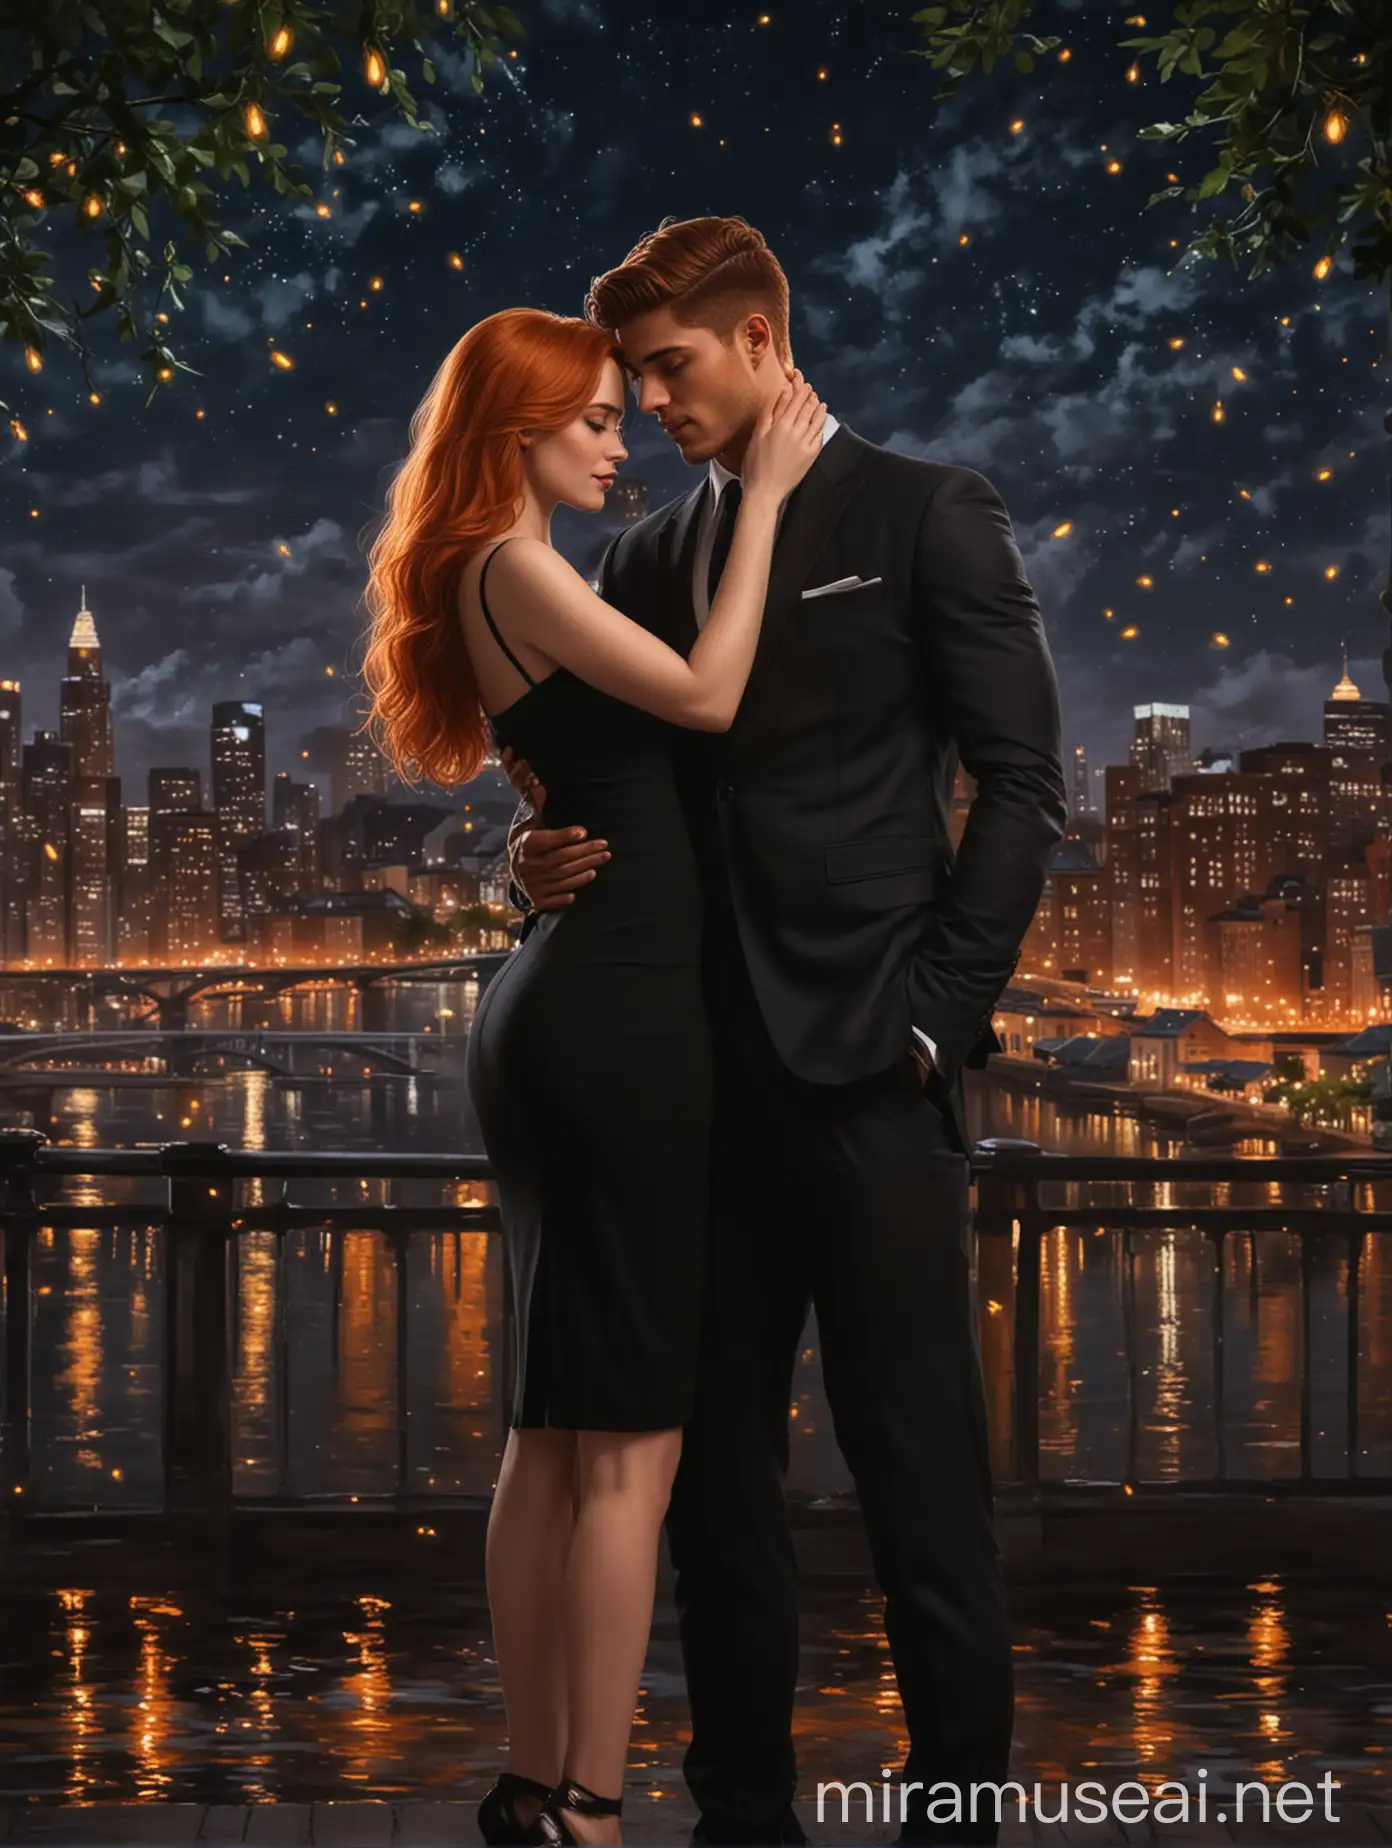 Romantic Couple in Night Cityscape with Fireflies